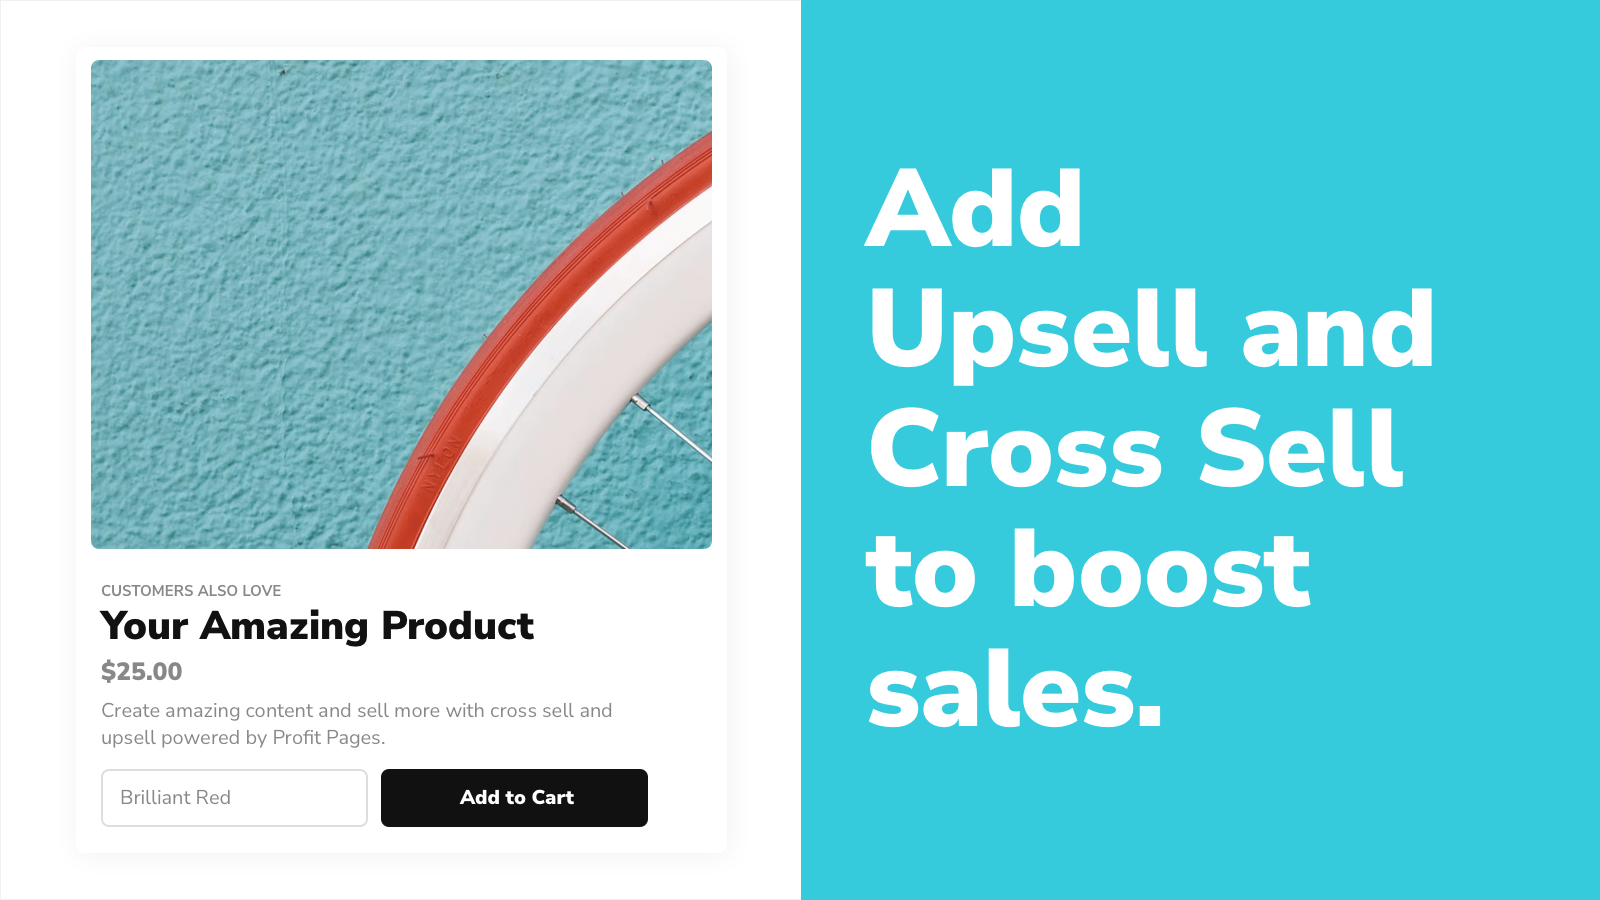 Add upsell and cross sell to boost sales.